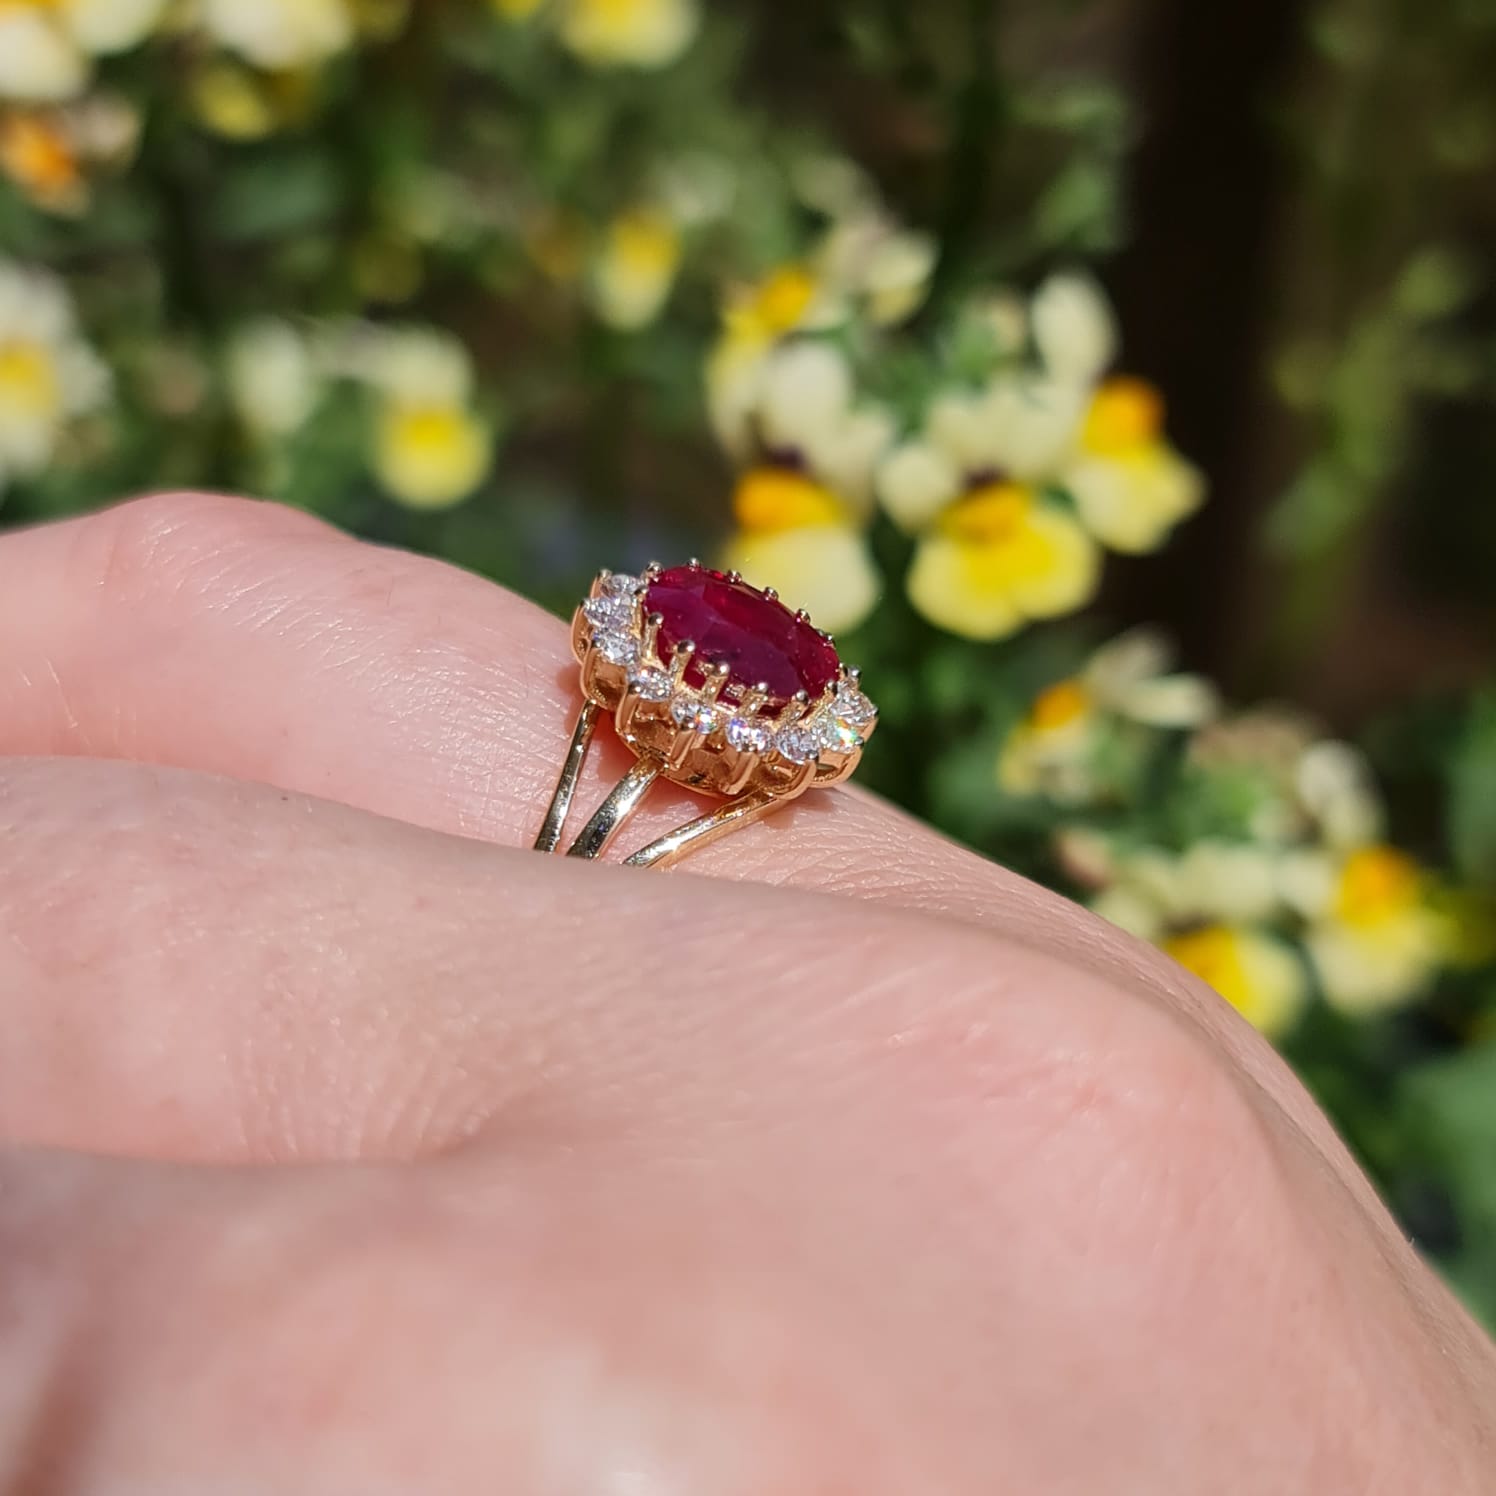 14K SOLID WHITE GOLD NATURAL RUBY RING WITH DOUBLE HALO OF DIAMONDS | eBay